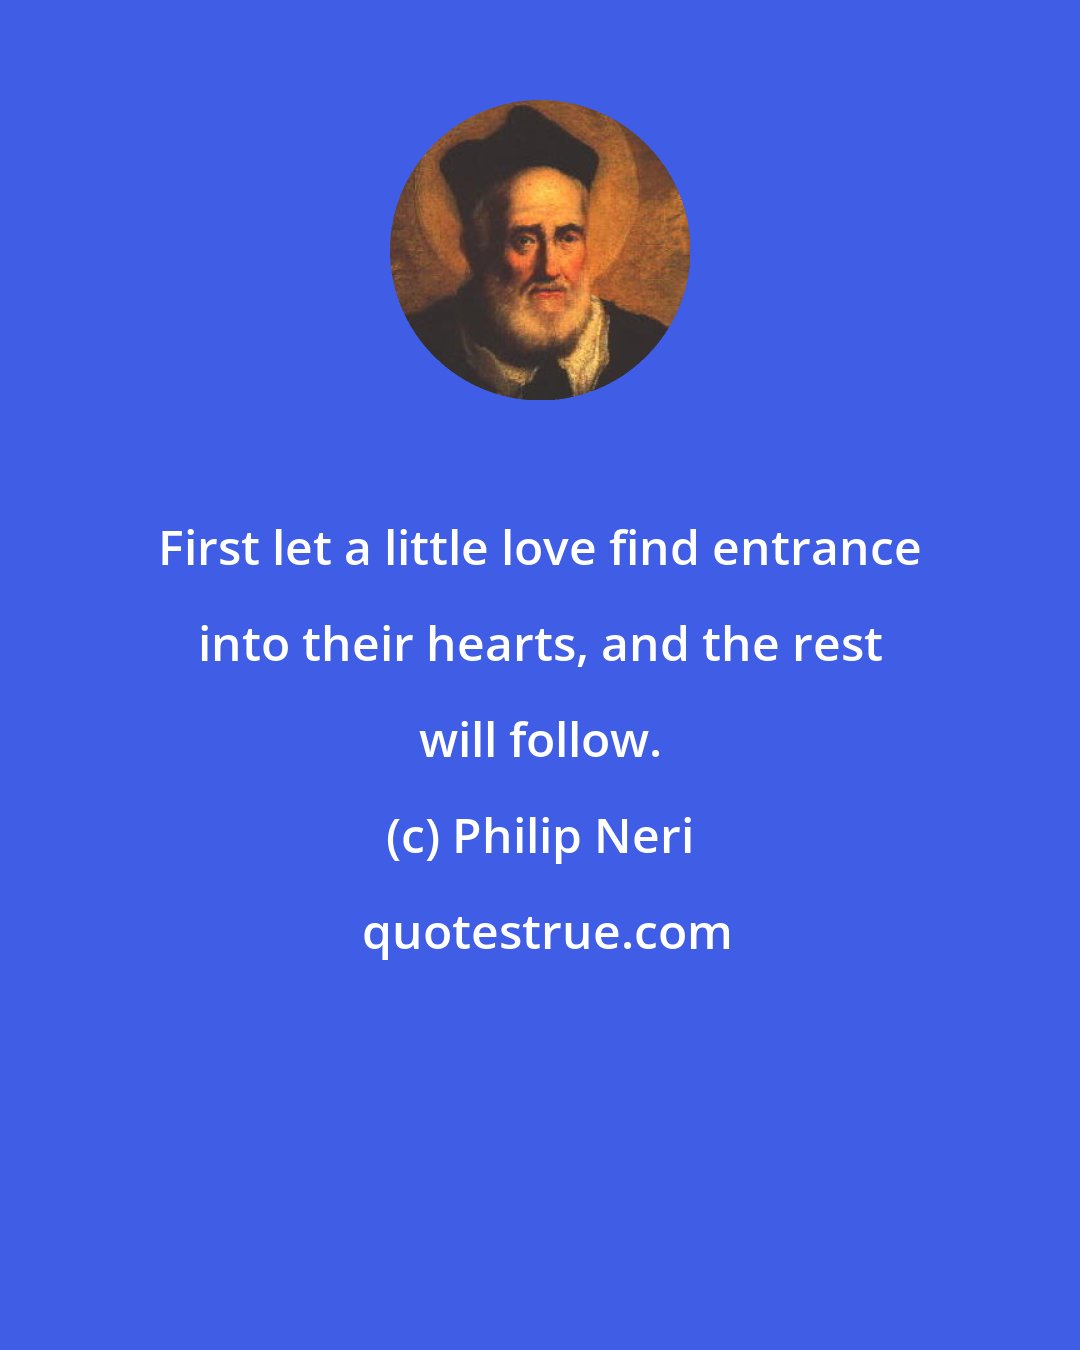 Philip Neri: First let a little love find entrance into their hearts, and the rest will follow.